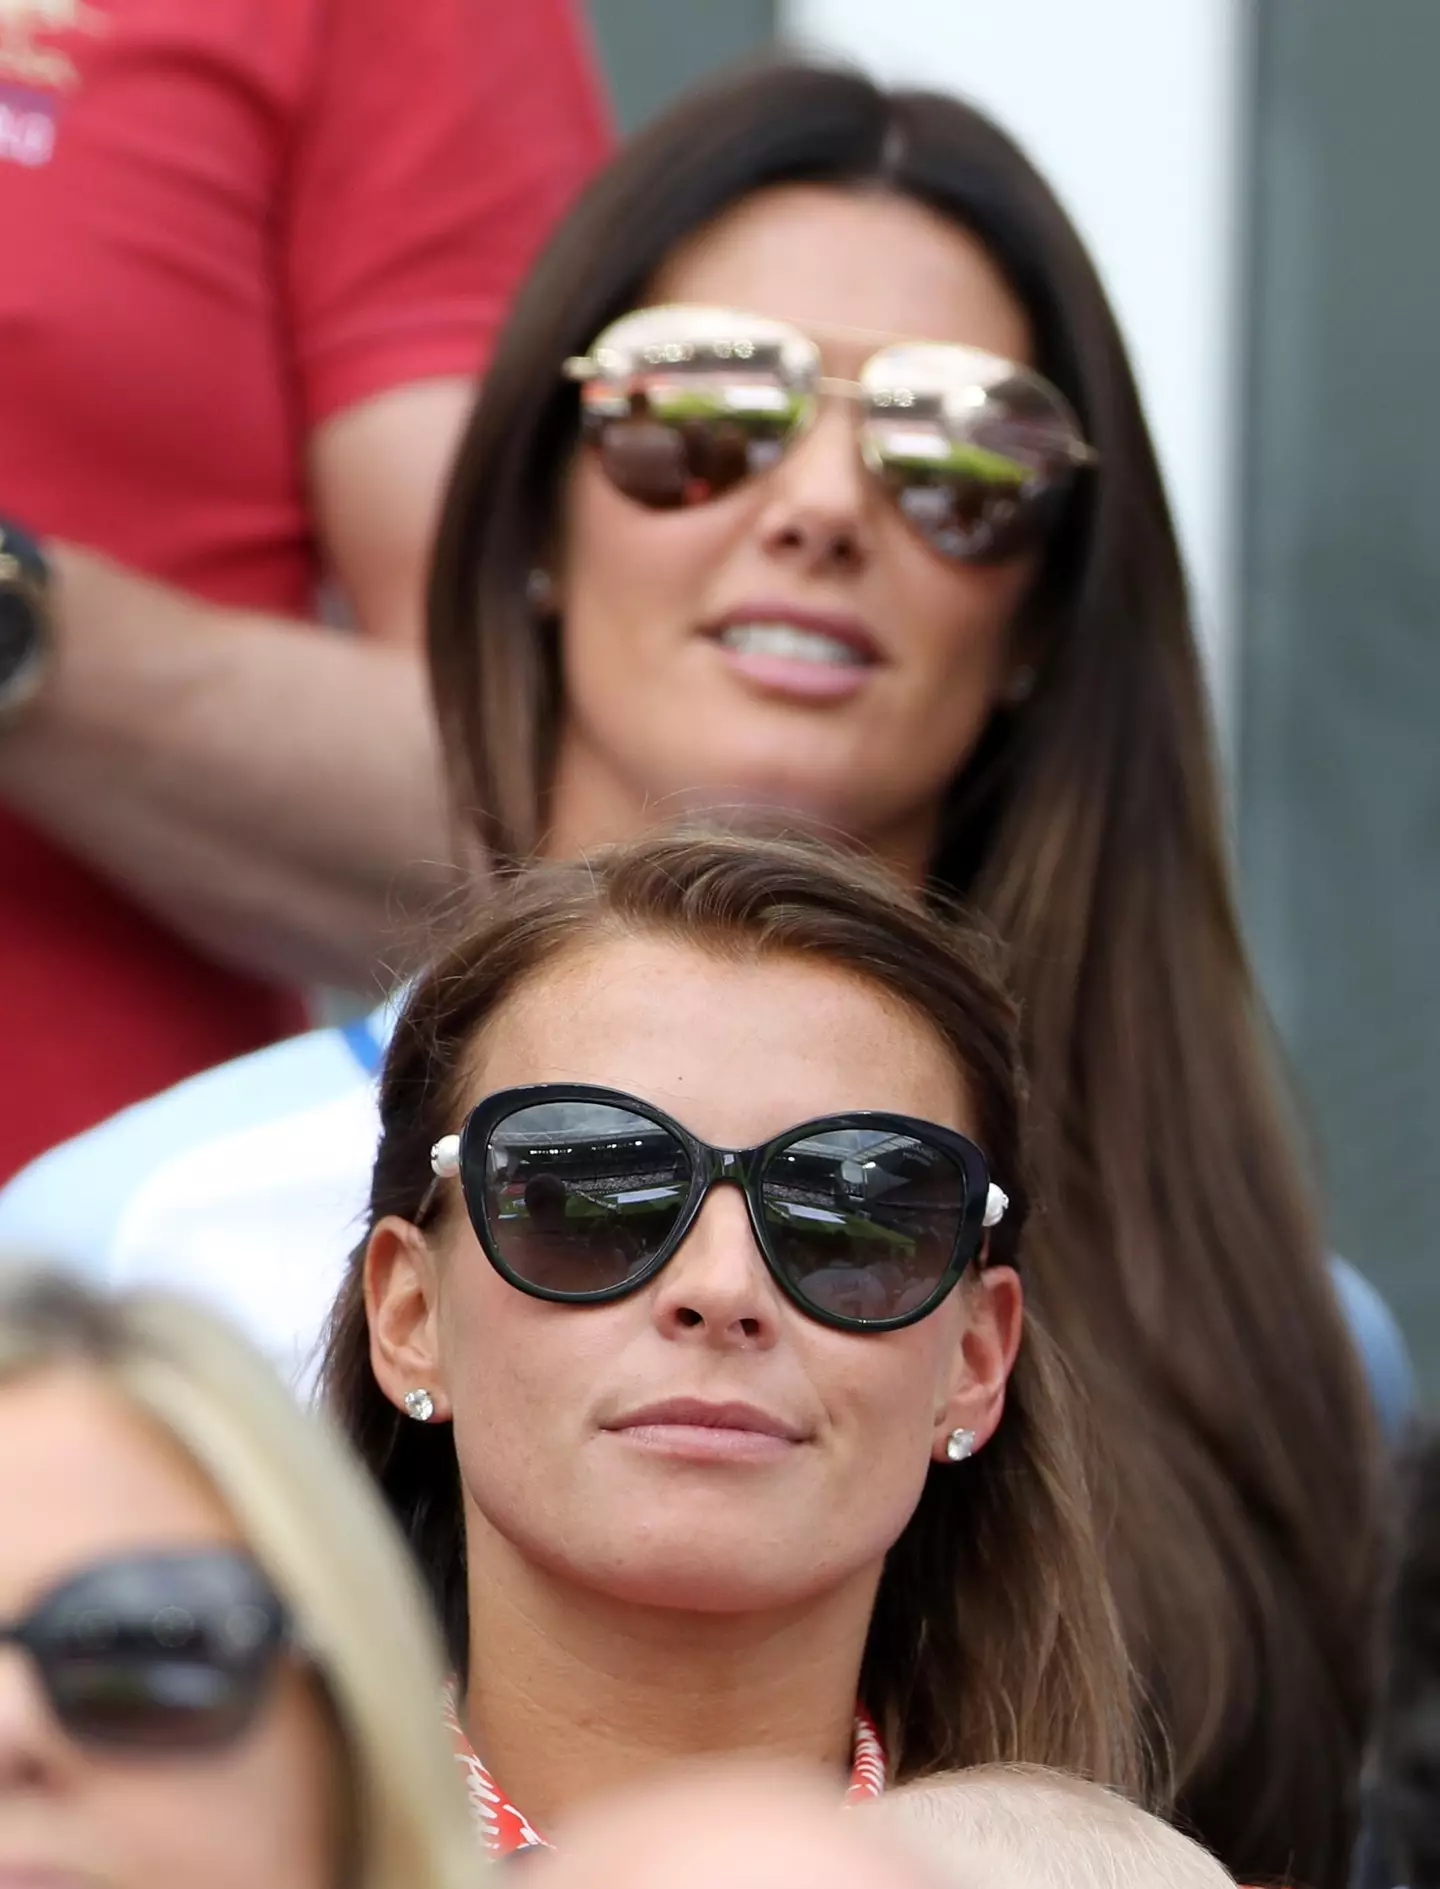 The messages have been made public as part of the ongoing legal case between Rebekah Vardy and Coleen Rooney (Image: PA)